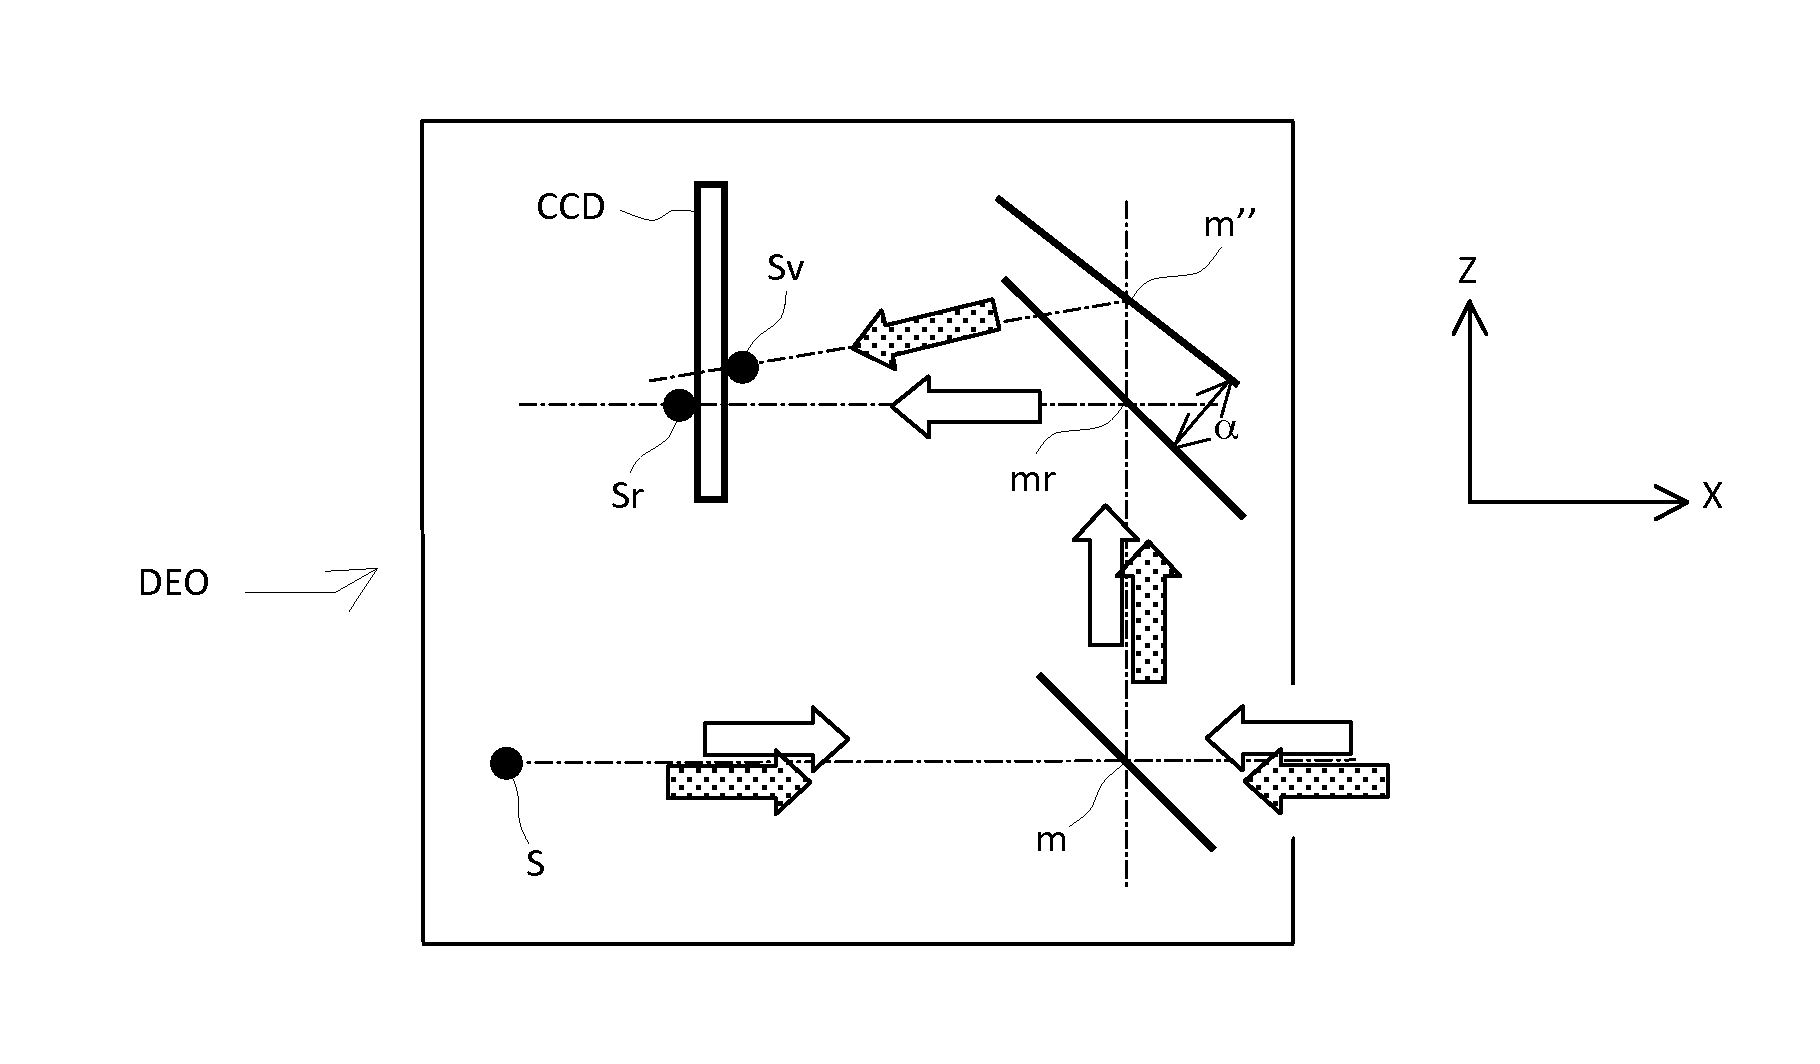 Optical system for measurement of orientation and position comprising a point source, central mask, photosensitive matrix sensor and corner cube